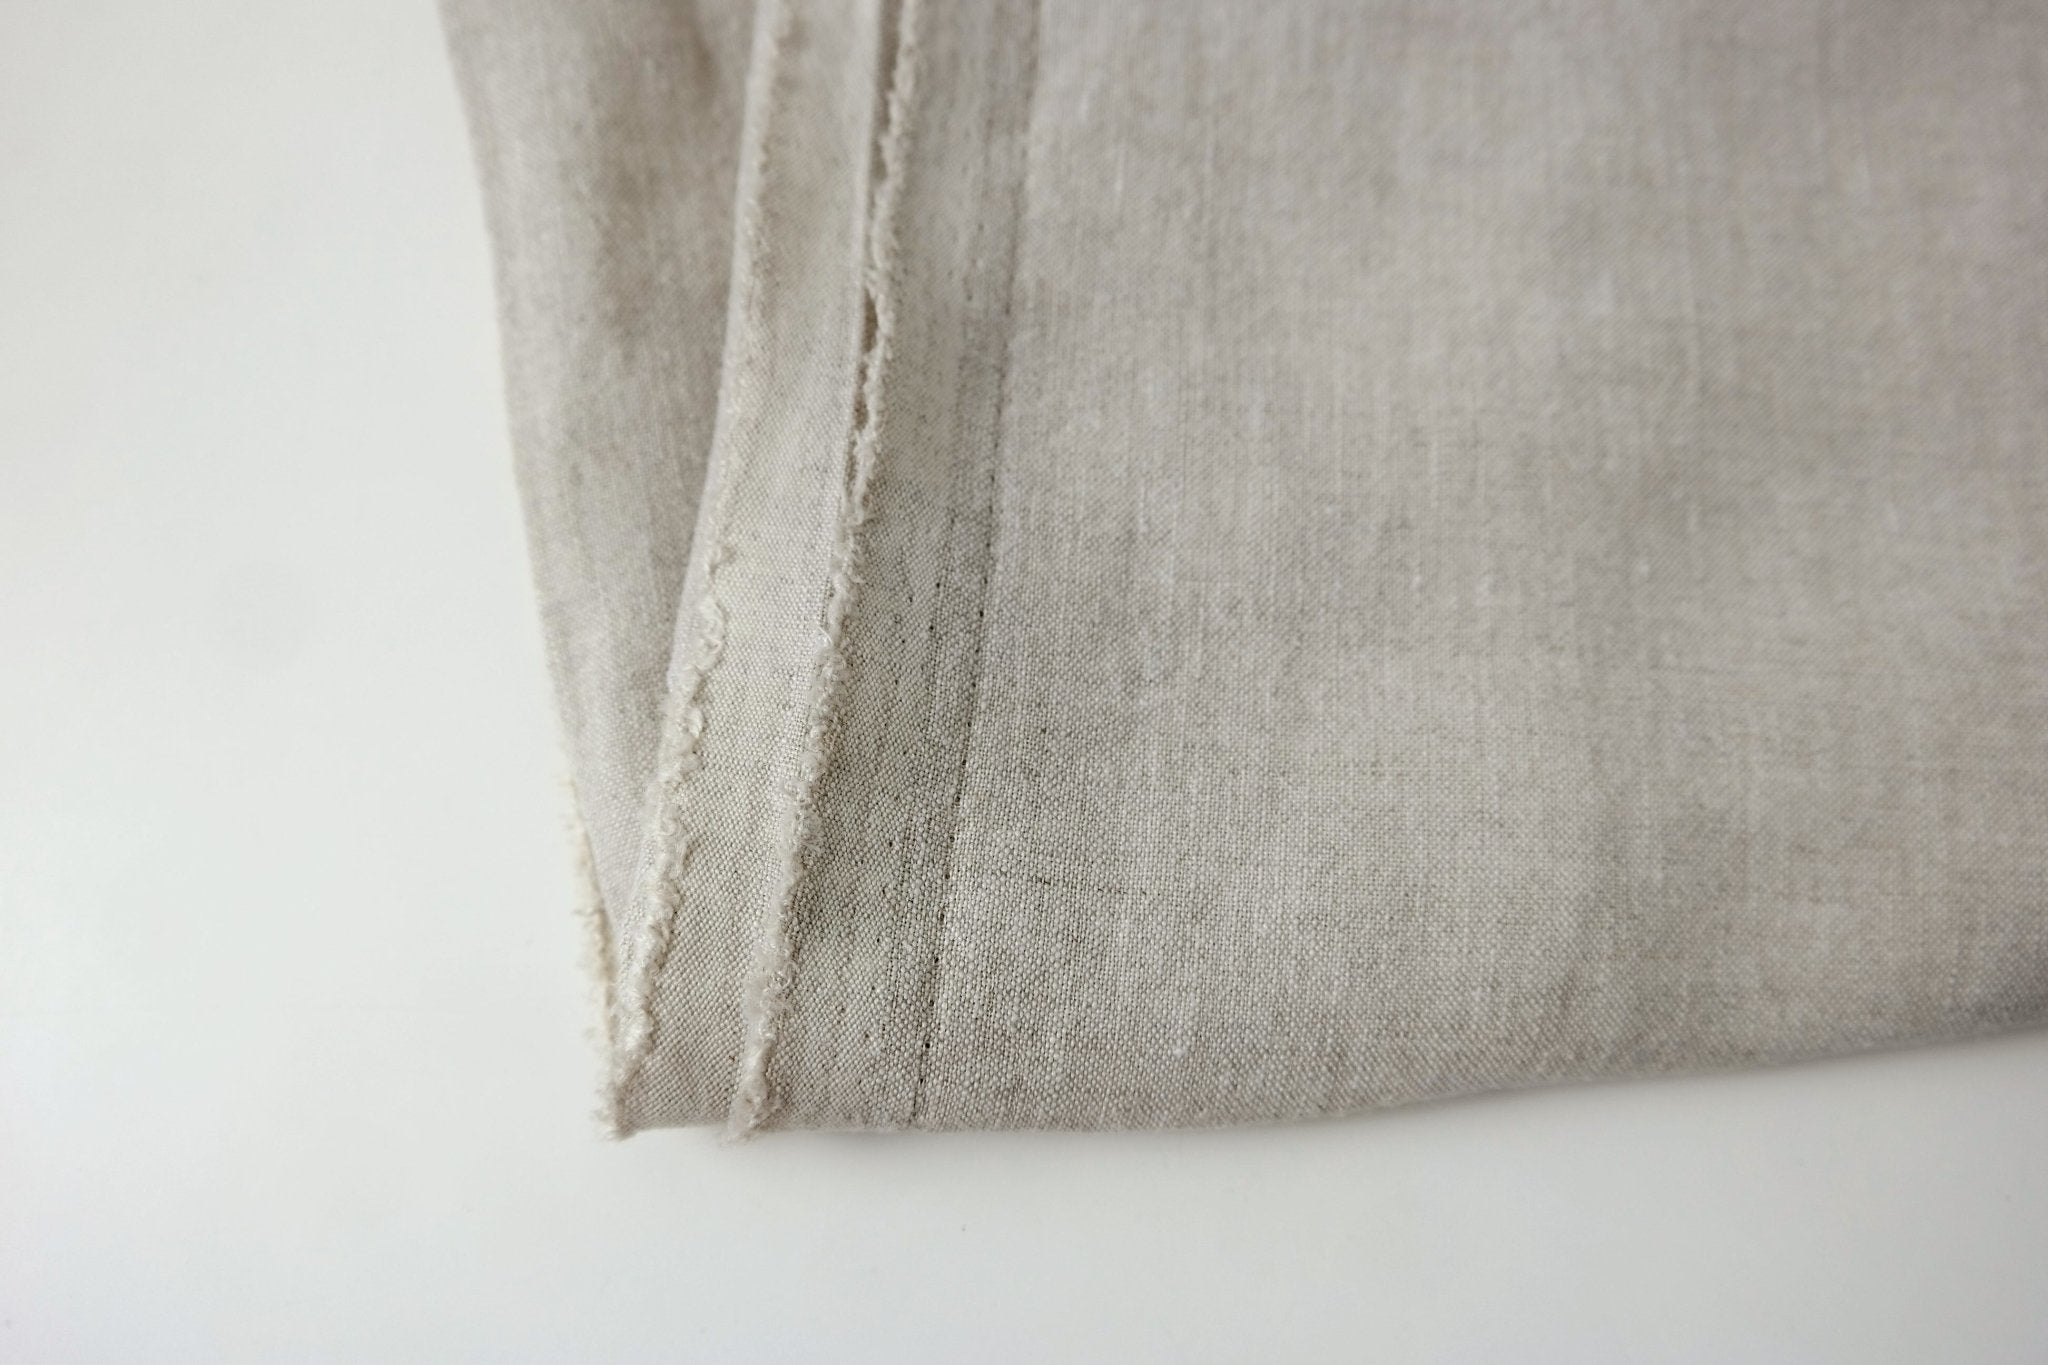 High Twisted 100% Linen Fabric Medium Weight 14S 6220 6600 6366 7369 - The Linen Lab - Natural 6366